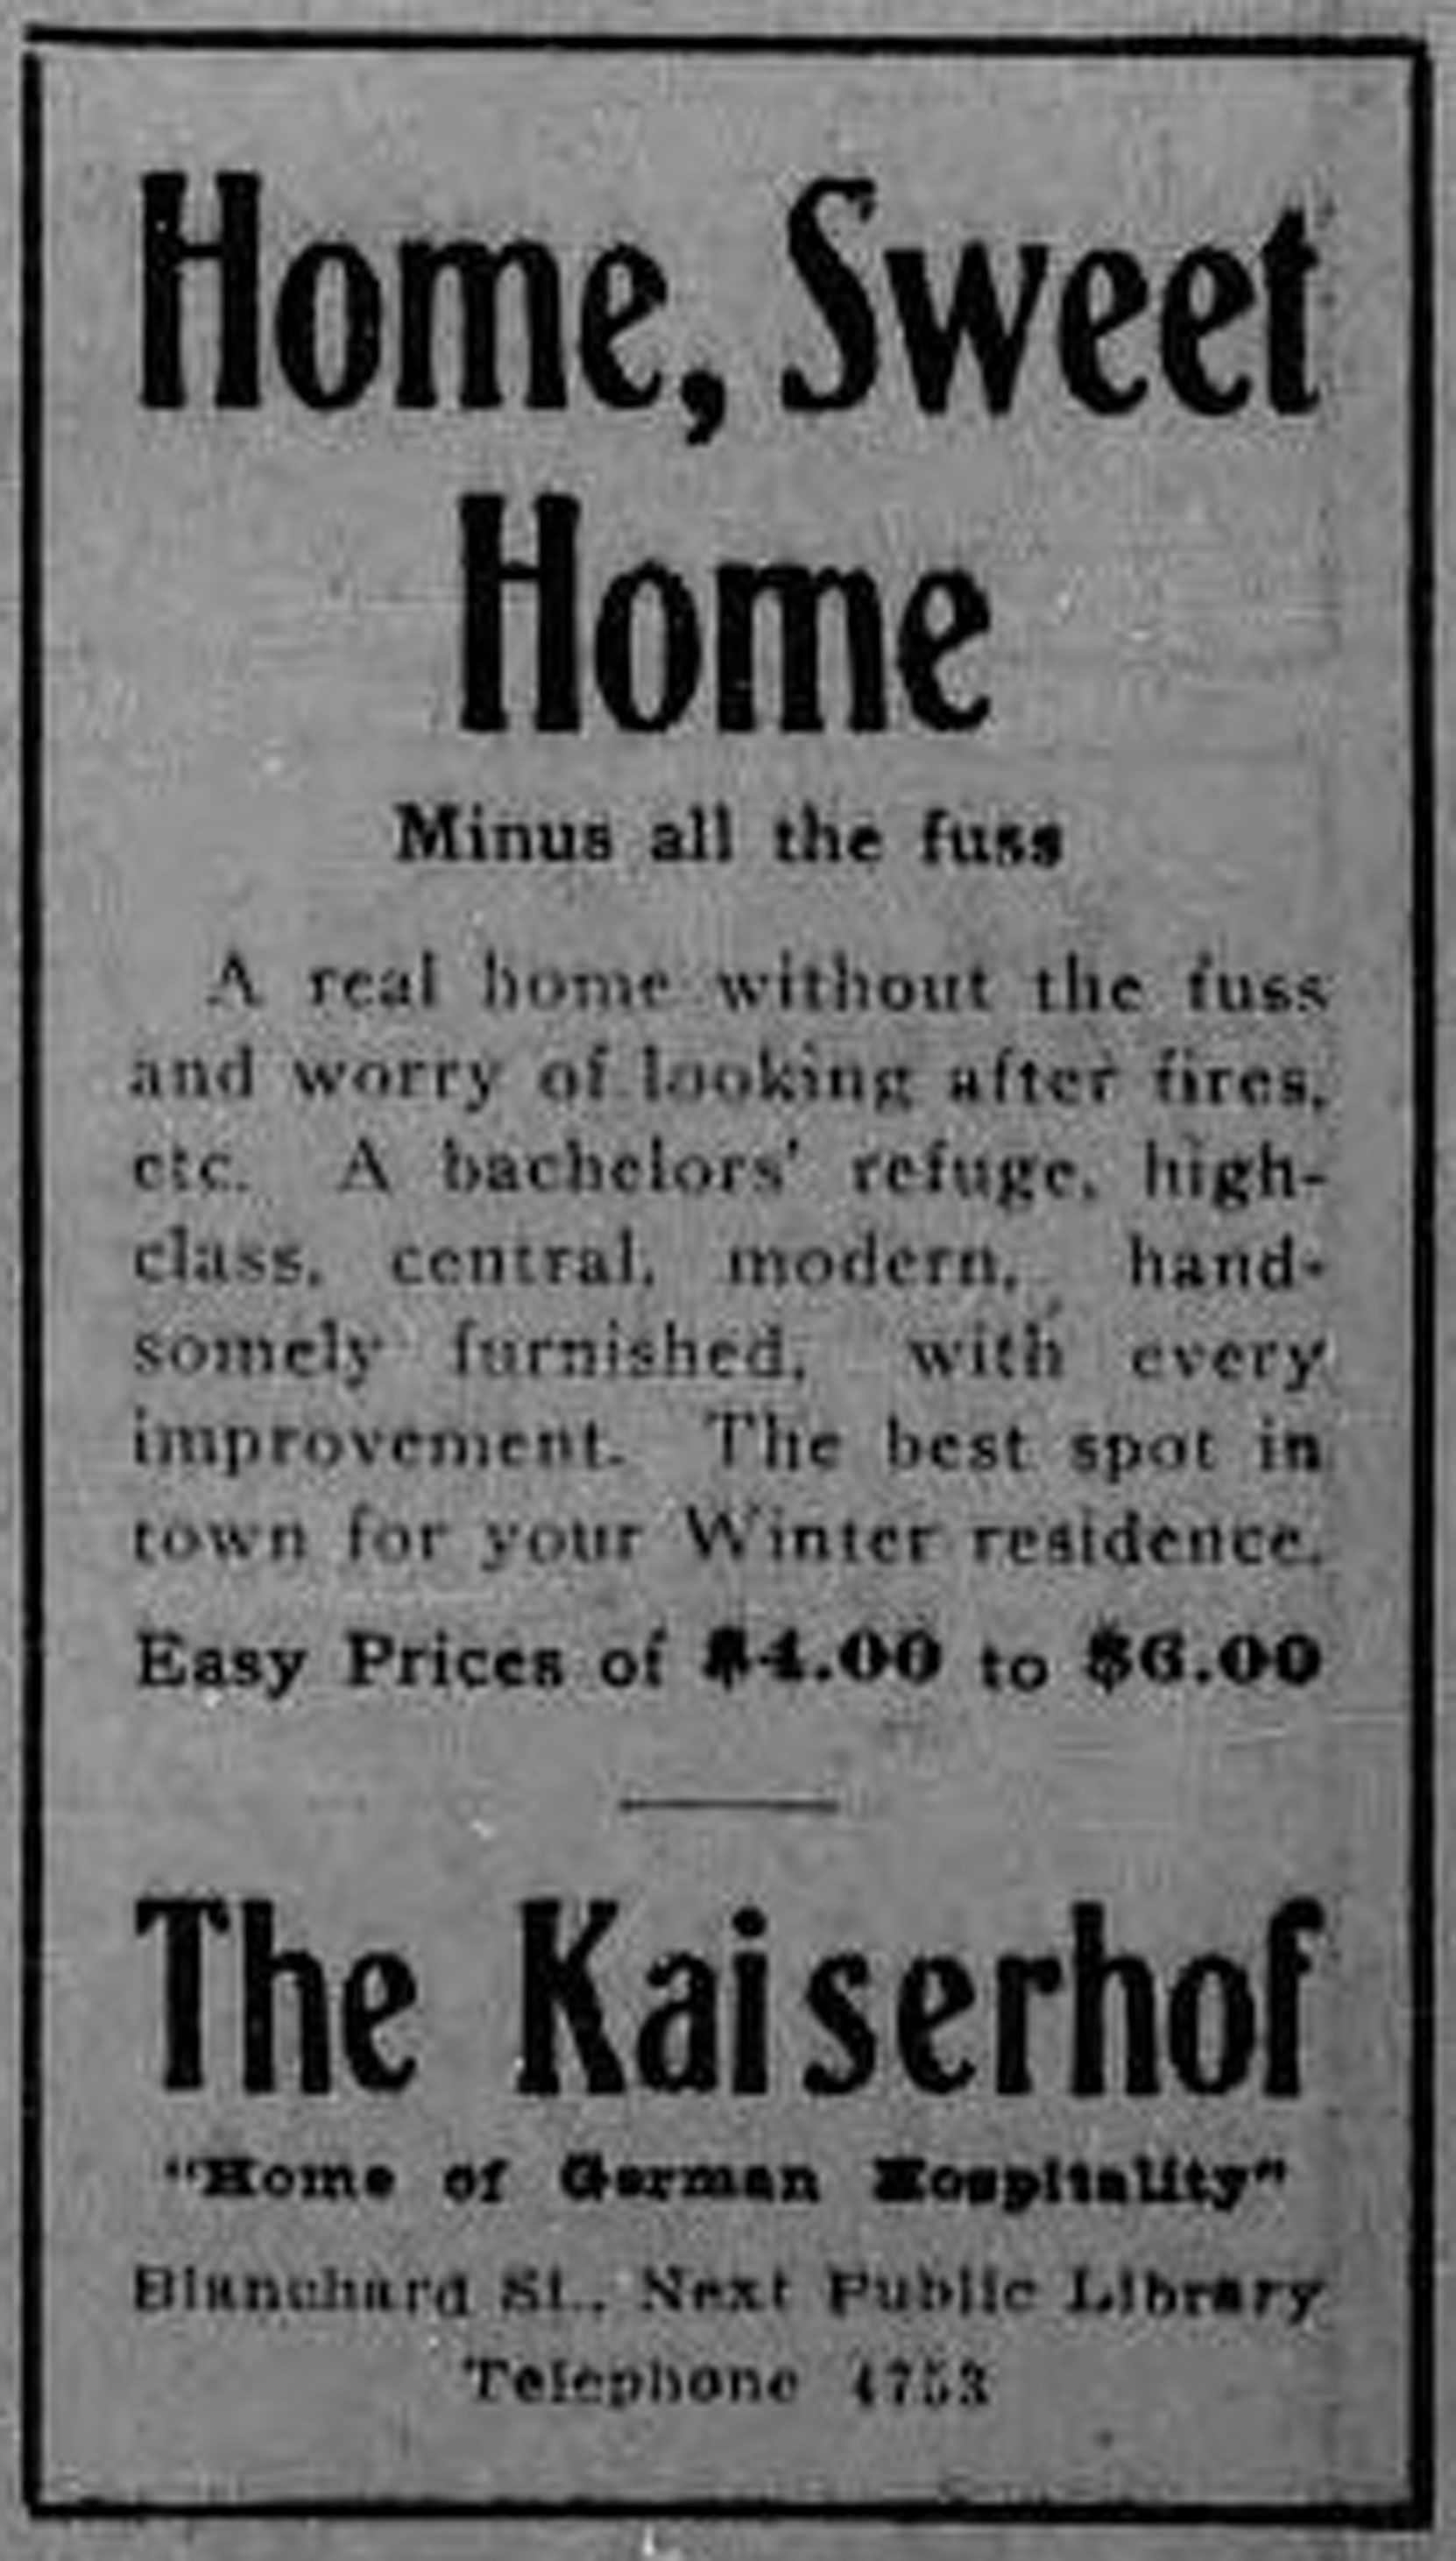 1913 advertisement for The Kaiserhof, 1320-1322 Blanshard Street. Notice the "bachelors' refuge", indicating the market The Kaiserhof was trying to attract. (Victoria Online Sightseeing Tours collection)